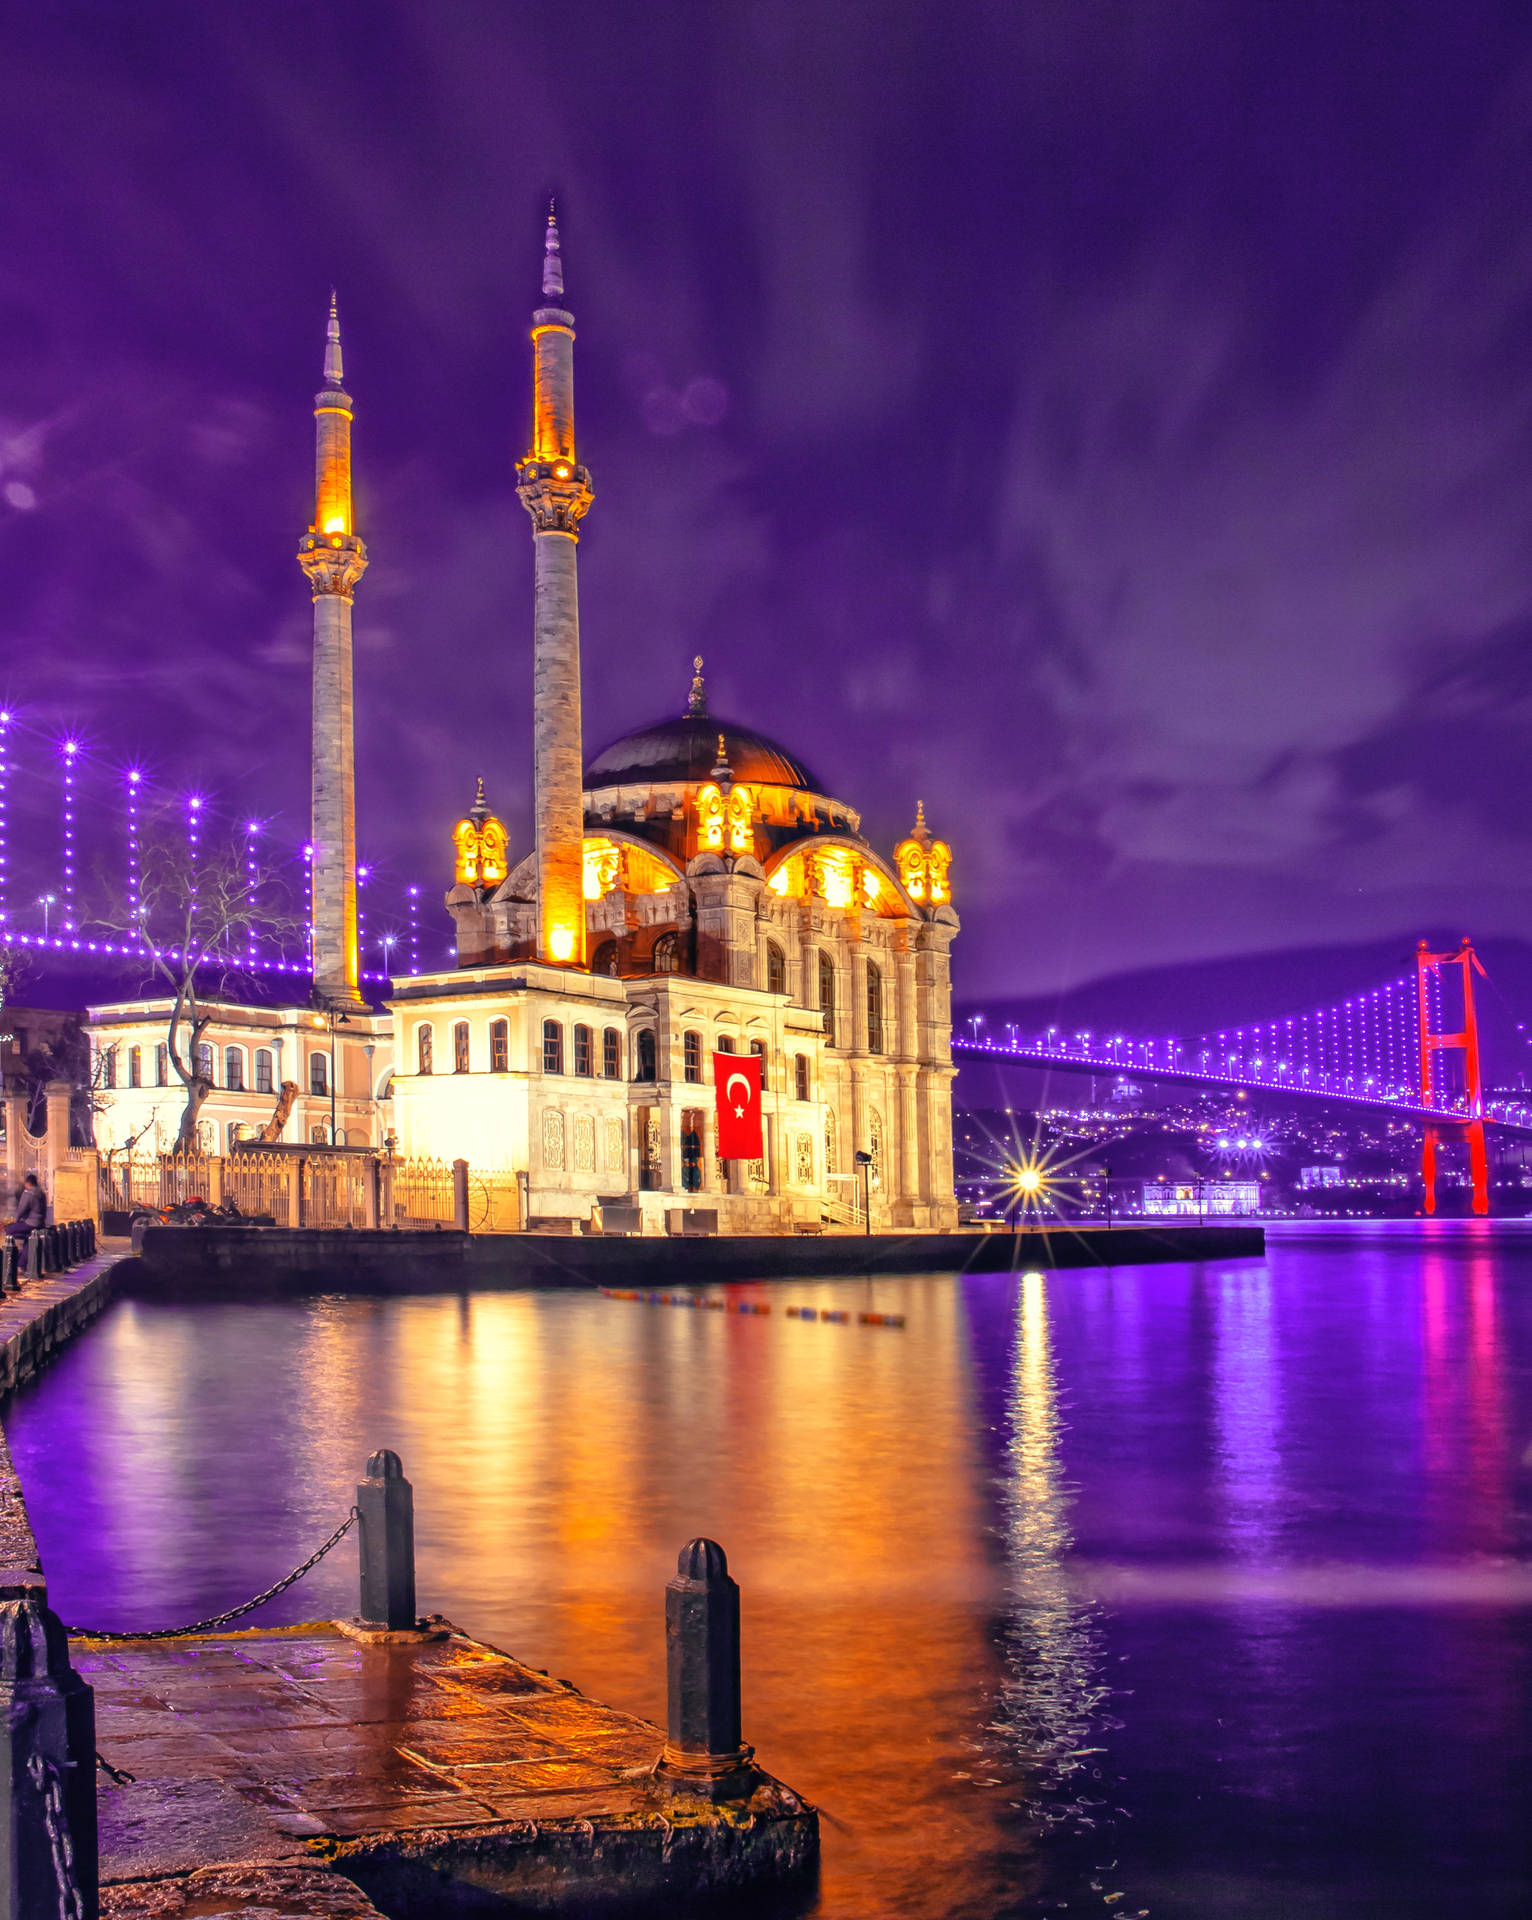 A Mosque Is Lit Up At Night With A Bridge Background